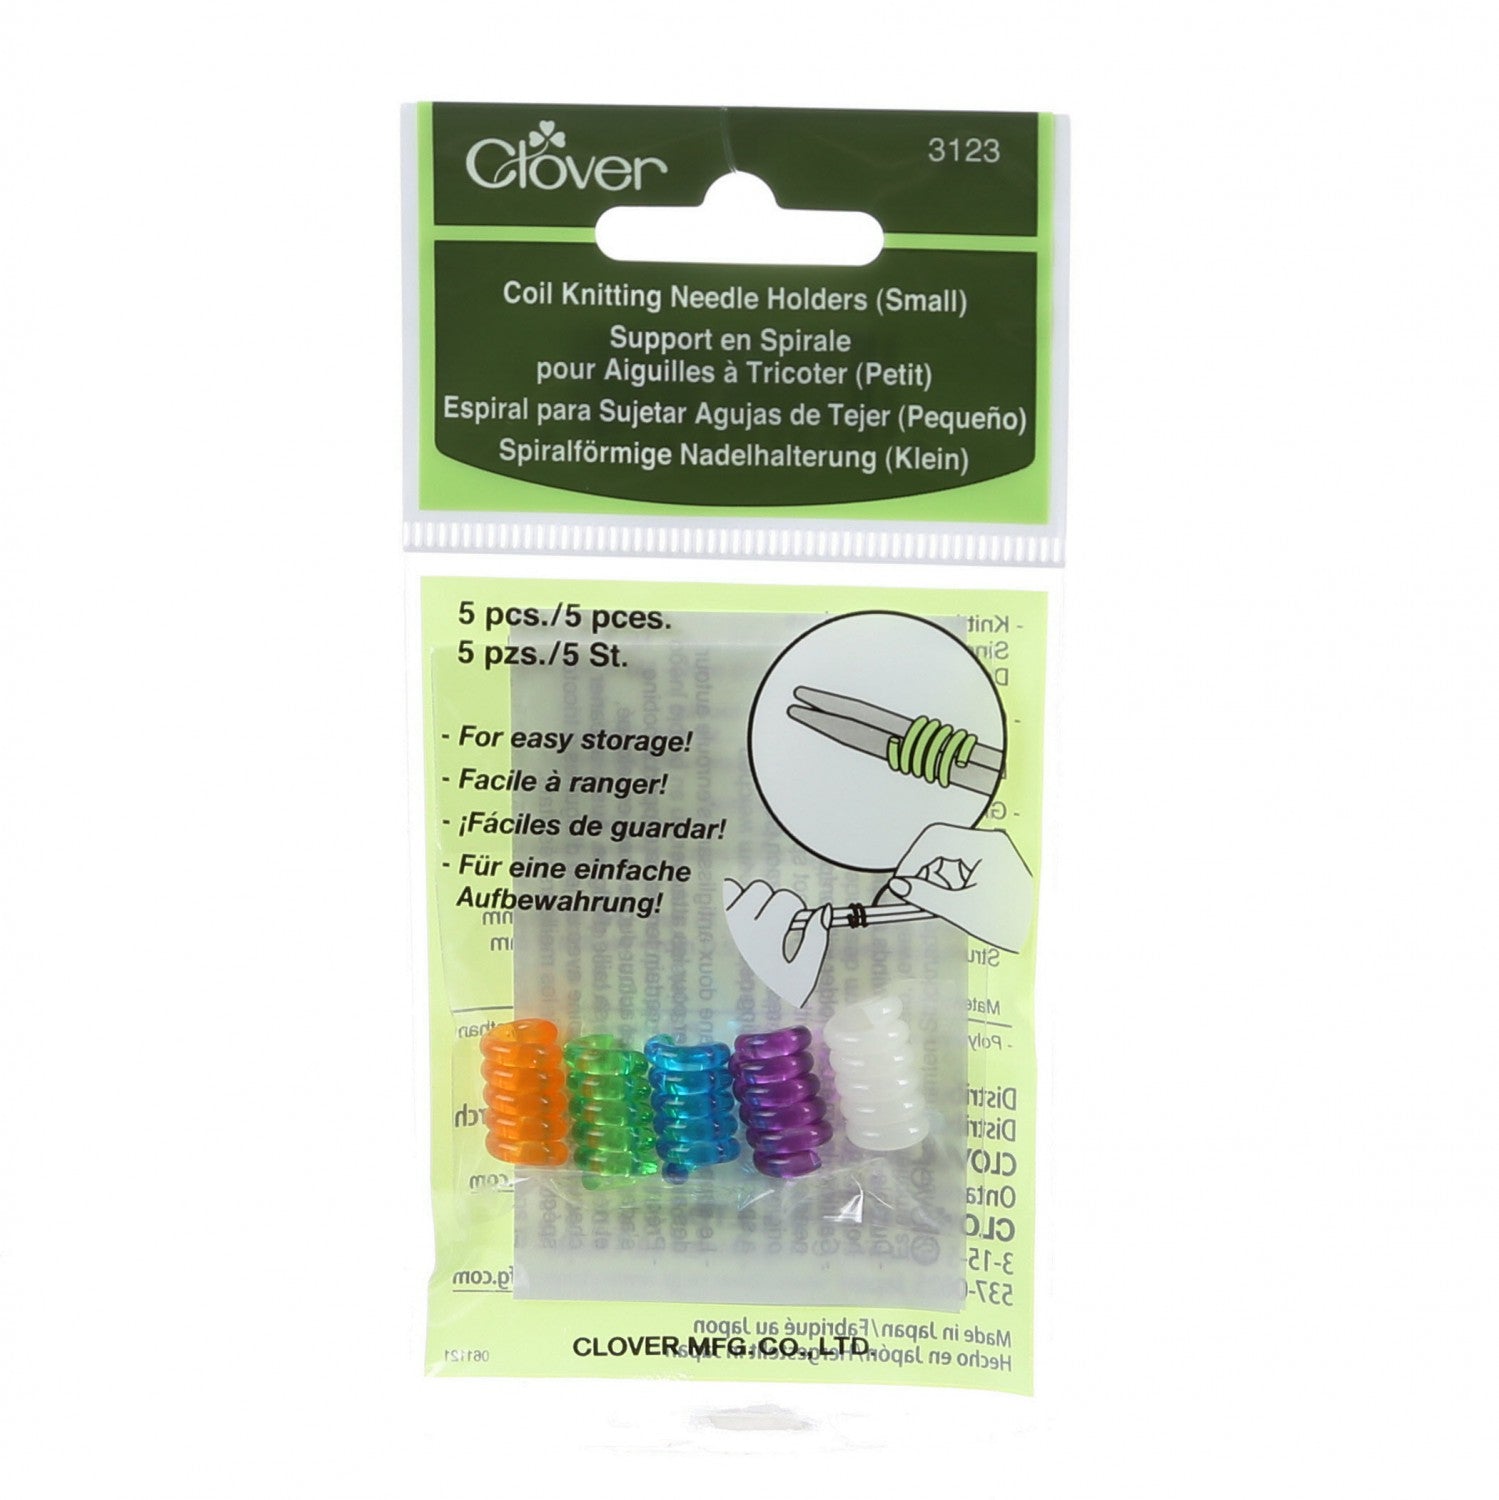 Clover Coil Knitting Needle Holder Small 5ct